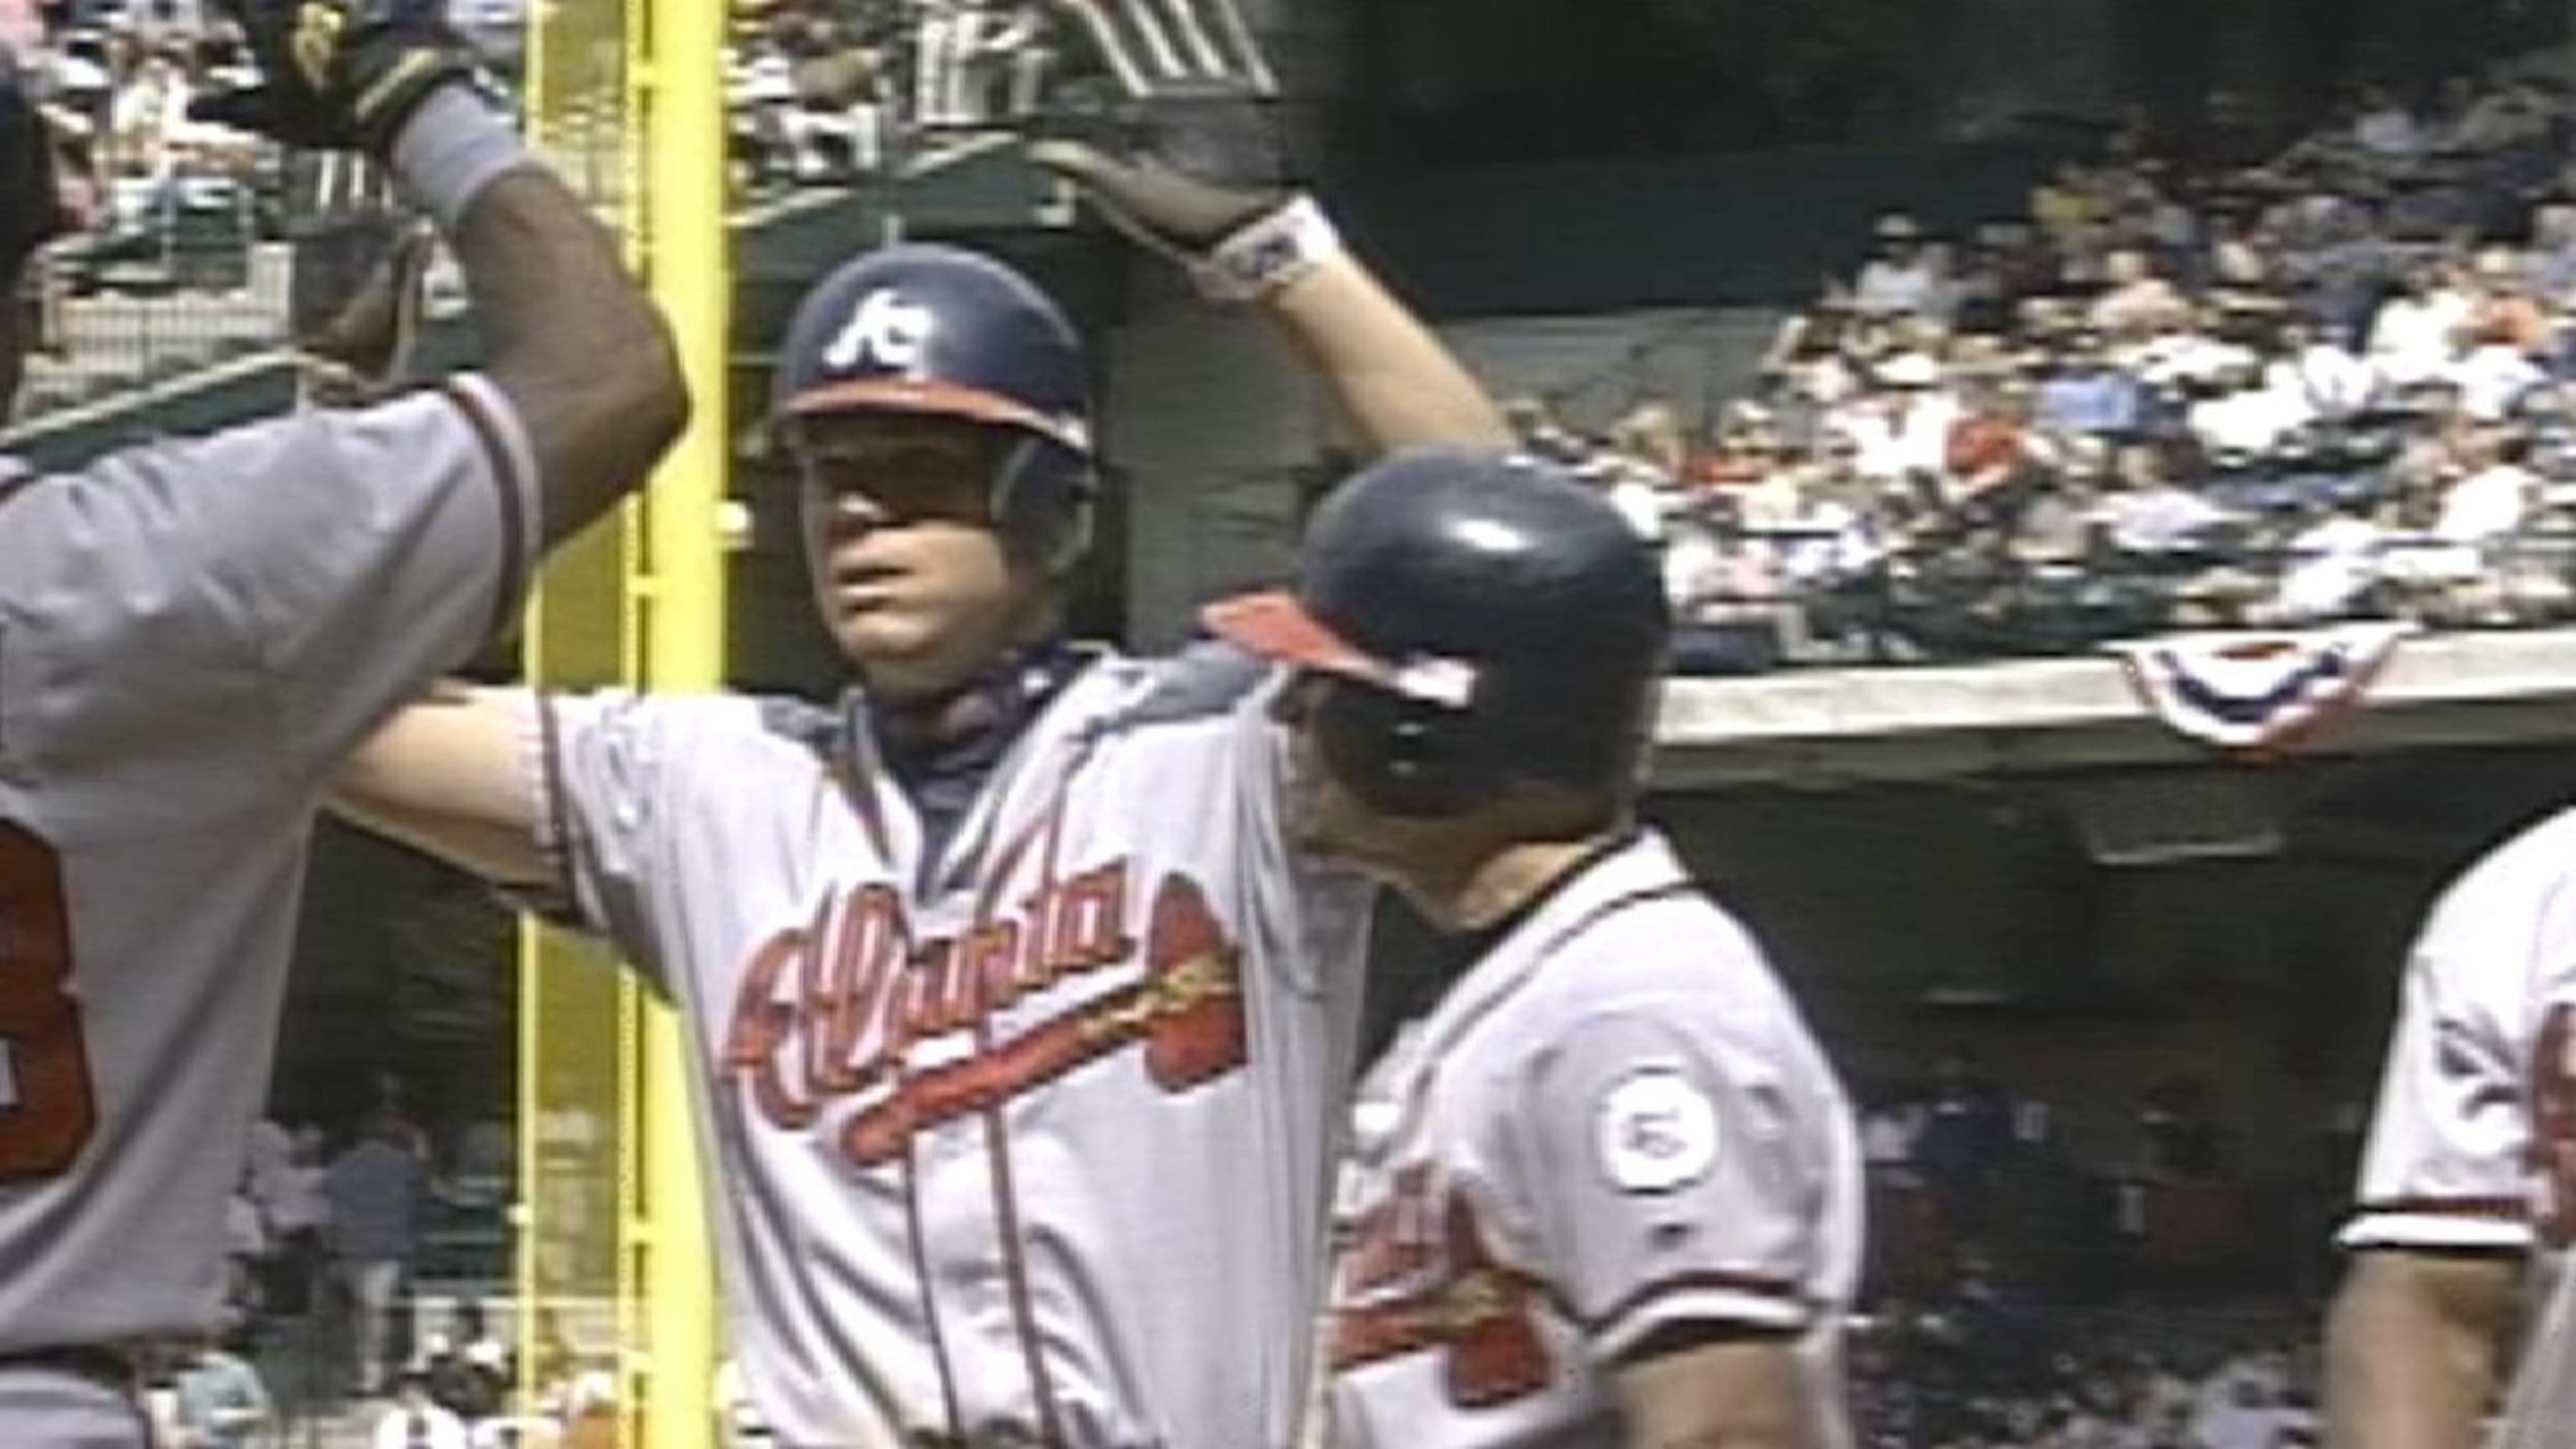 This Day in Braves History: Chipper Jones hits 400th career home run -  Battery Power